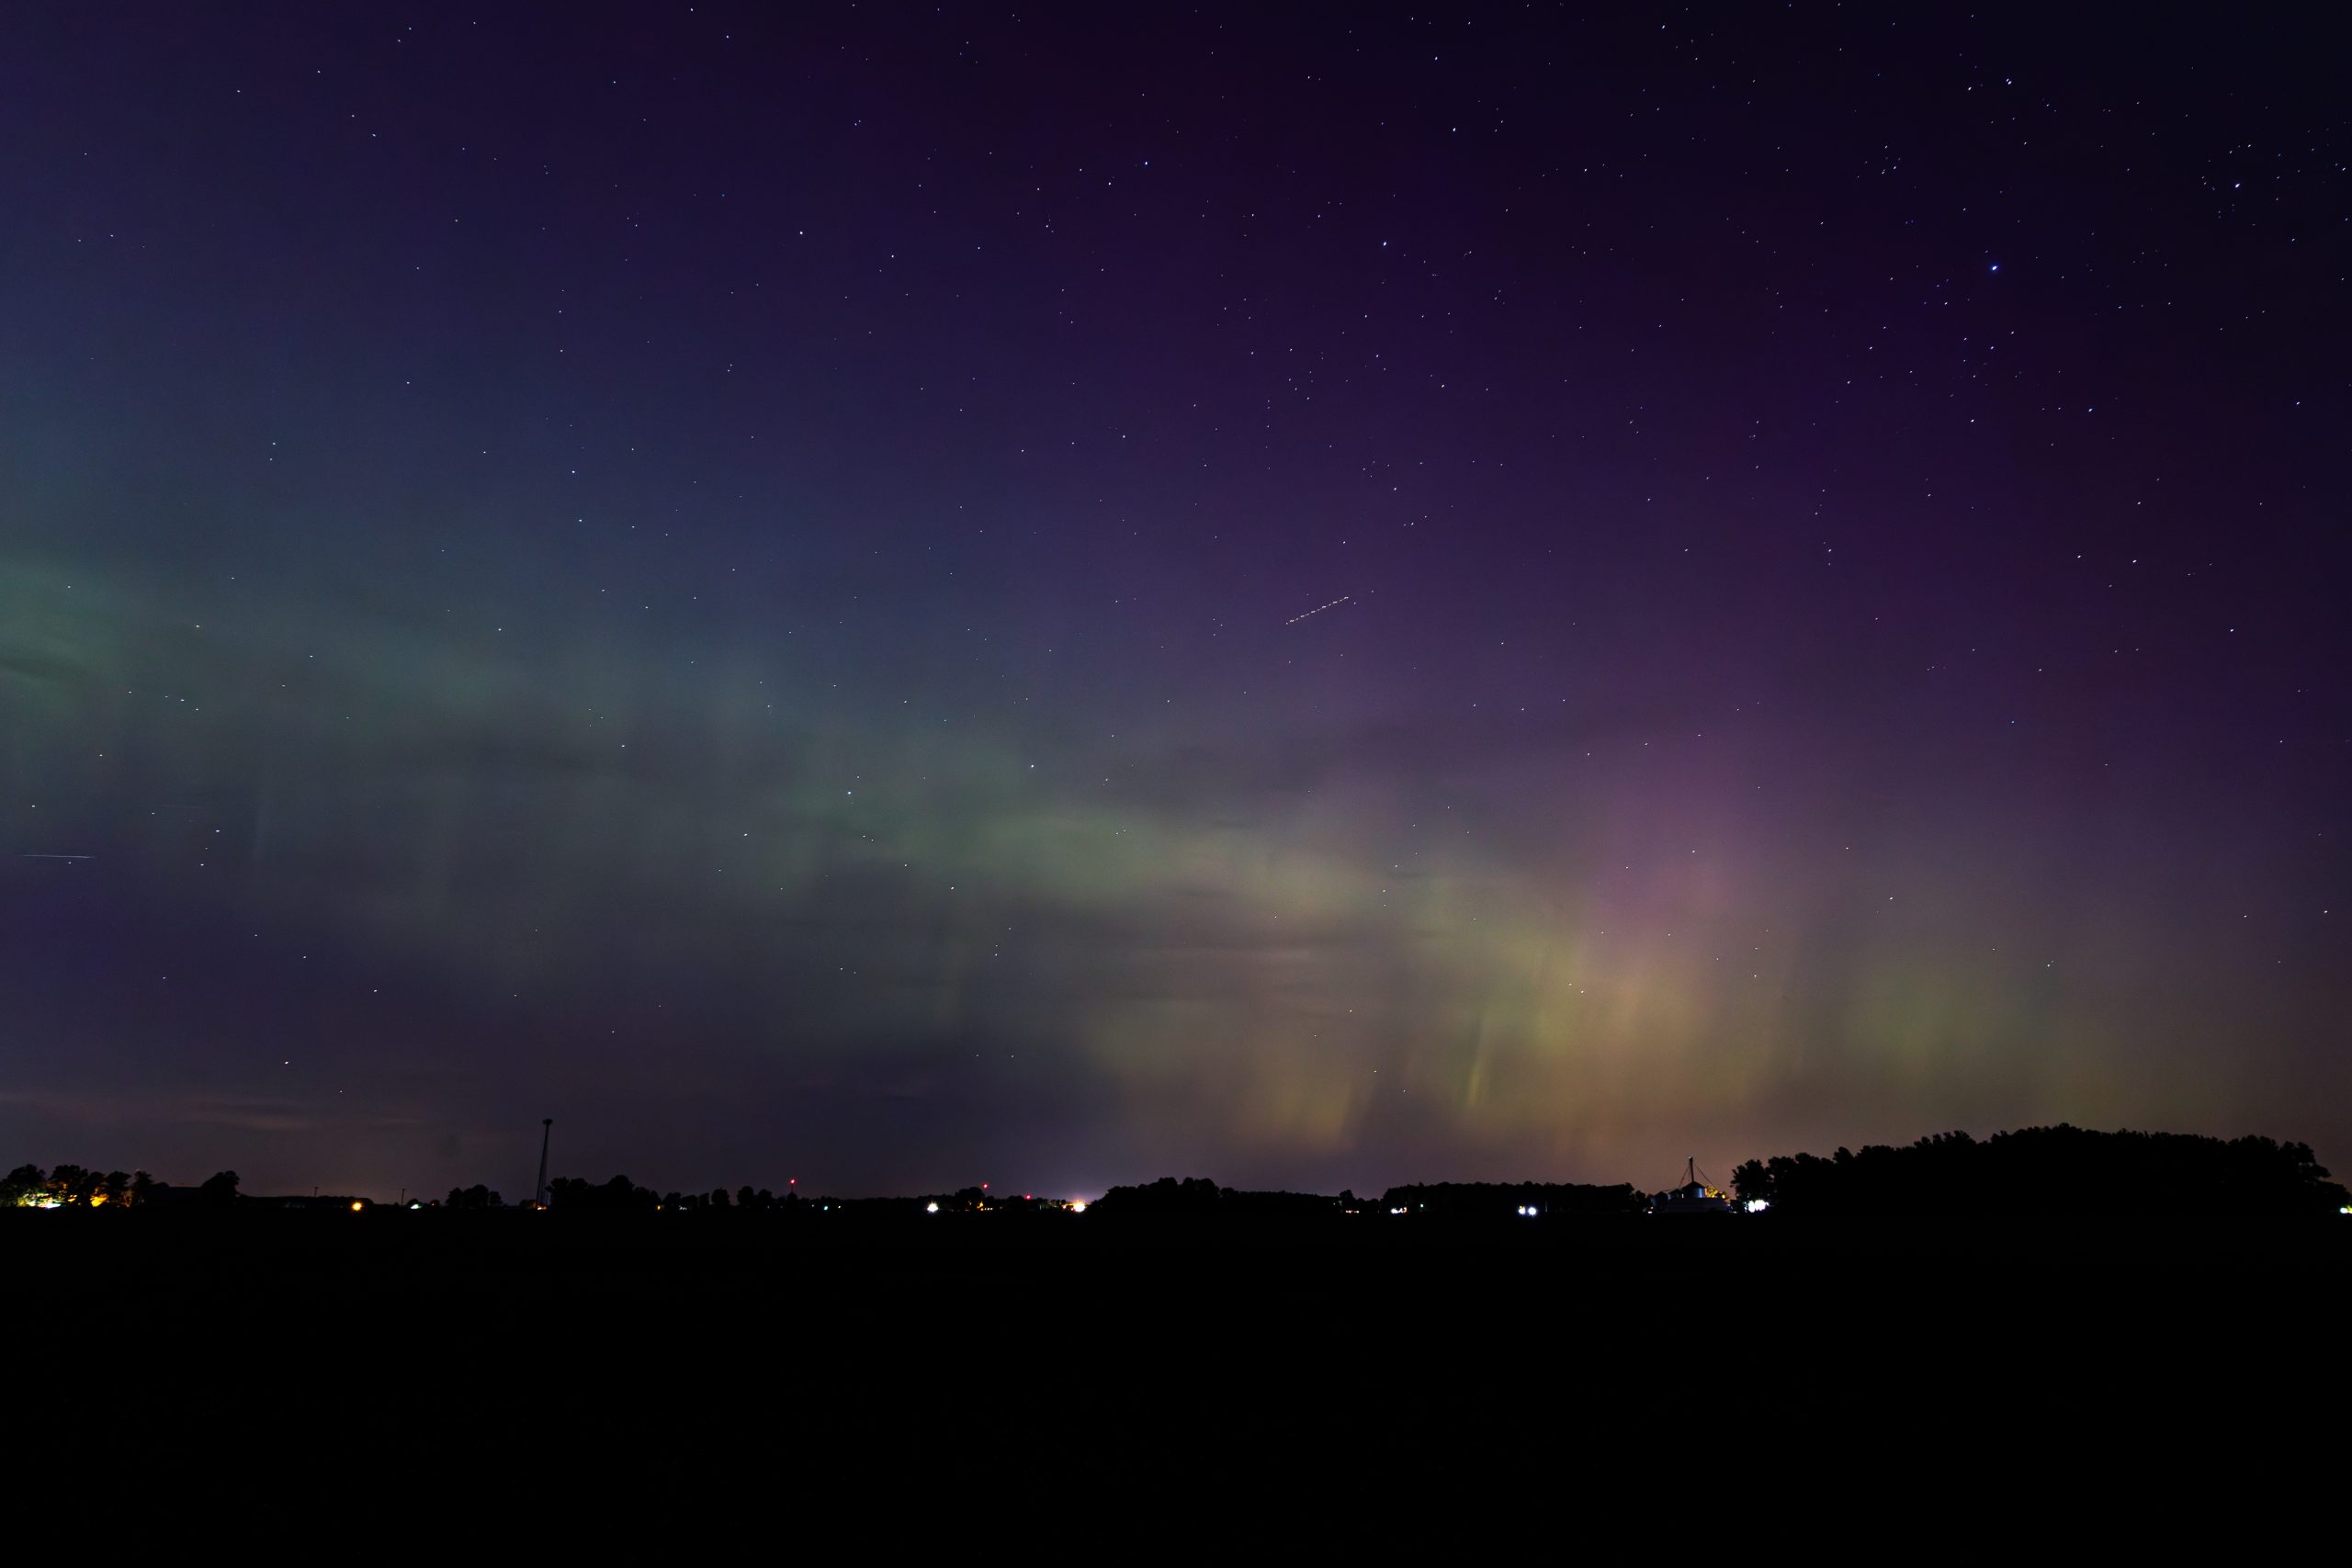 Aurora Borealis At This Time of Year? In This Part of the Country?